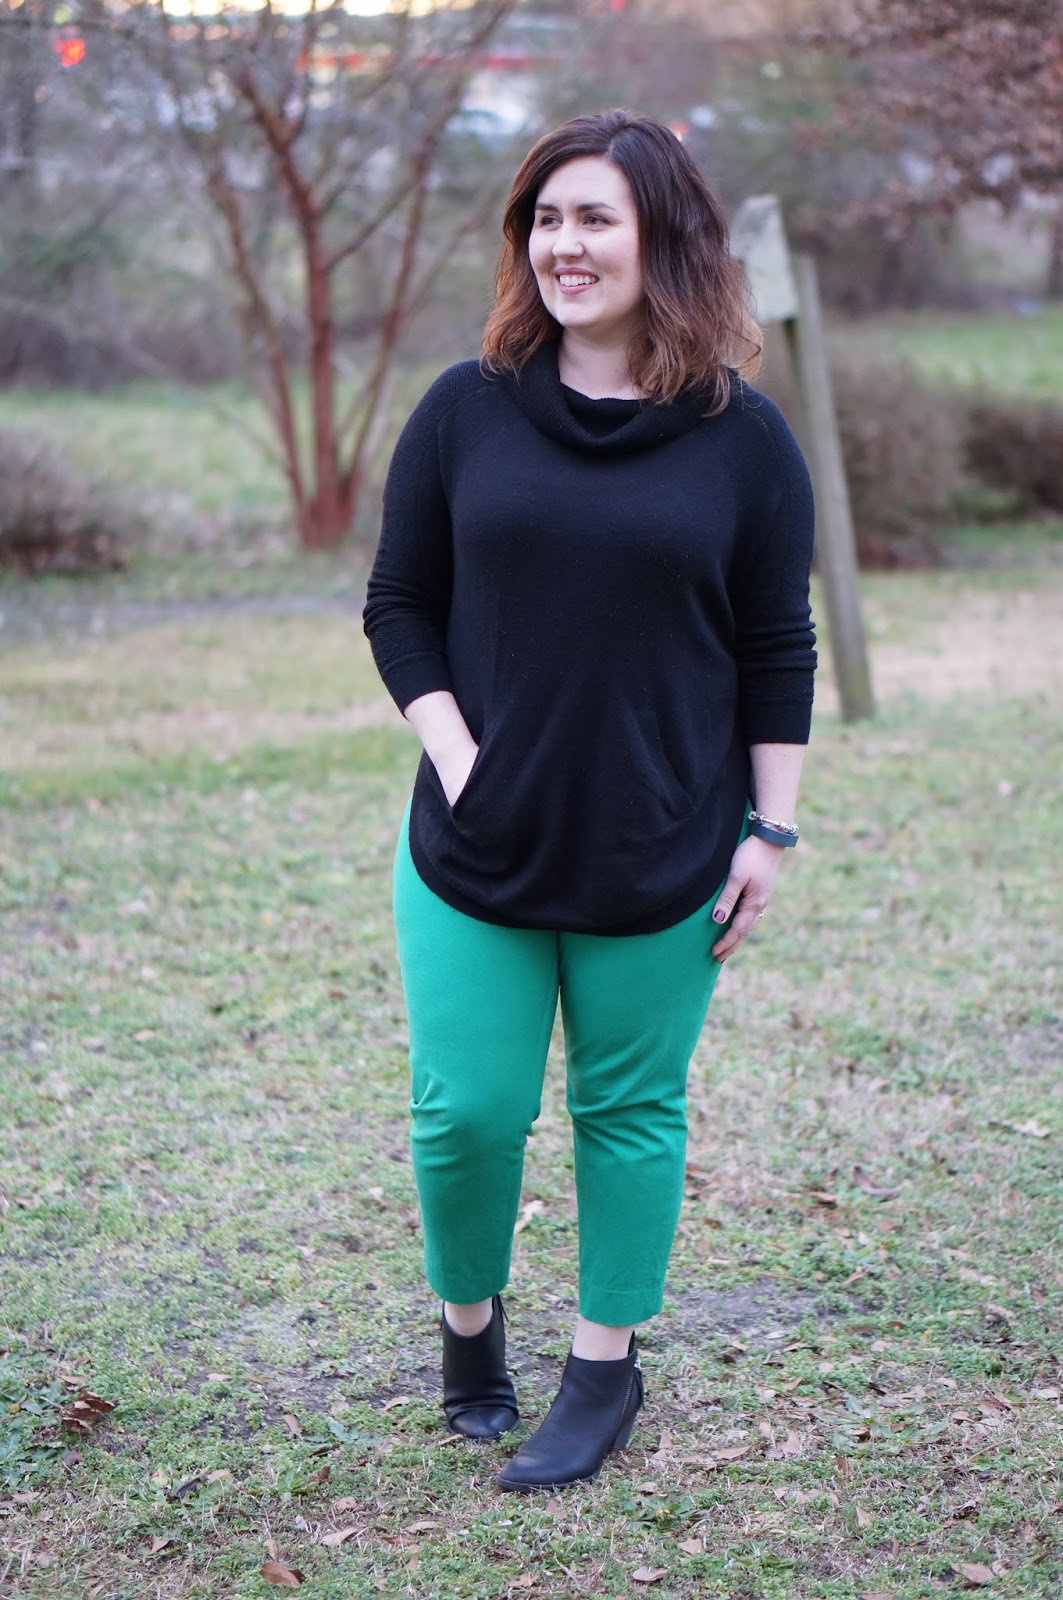 Rebecca Lately Colorblocking Kate Spade Studs Fate Stitch Fix Sweater Banana Republic Ankle Pants Target Jameson Booties